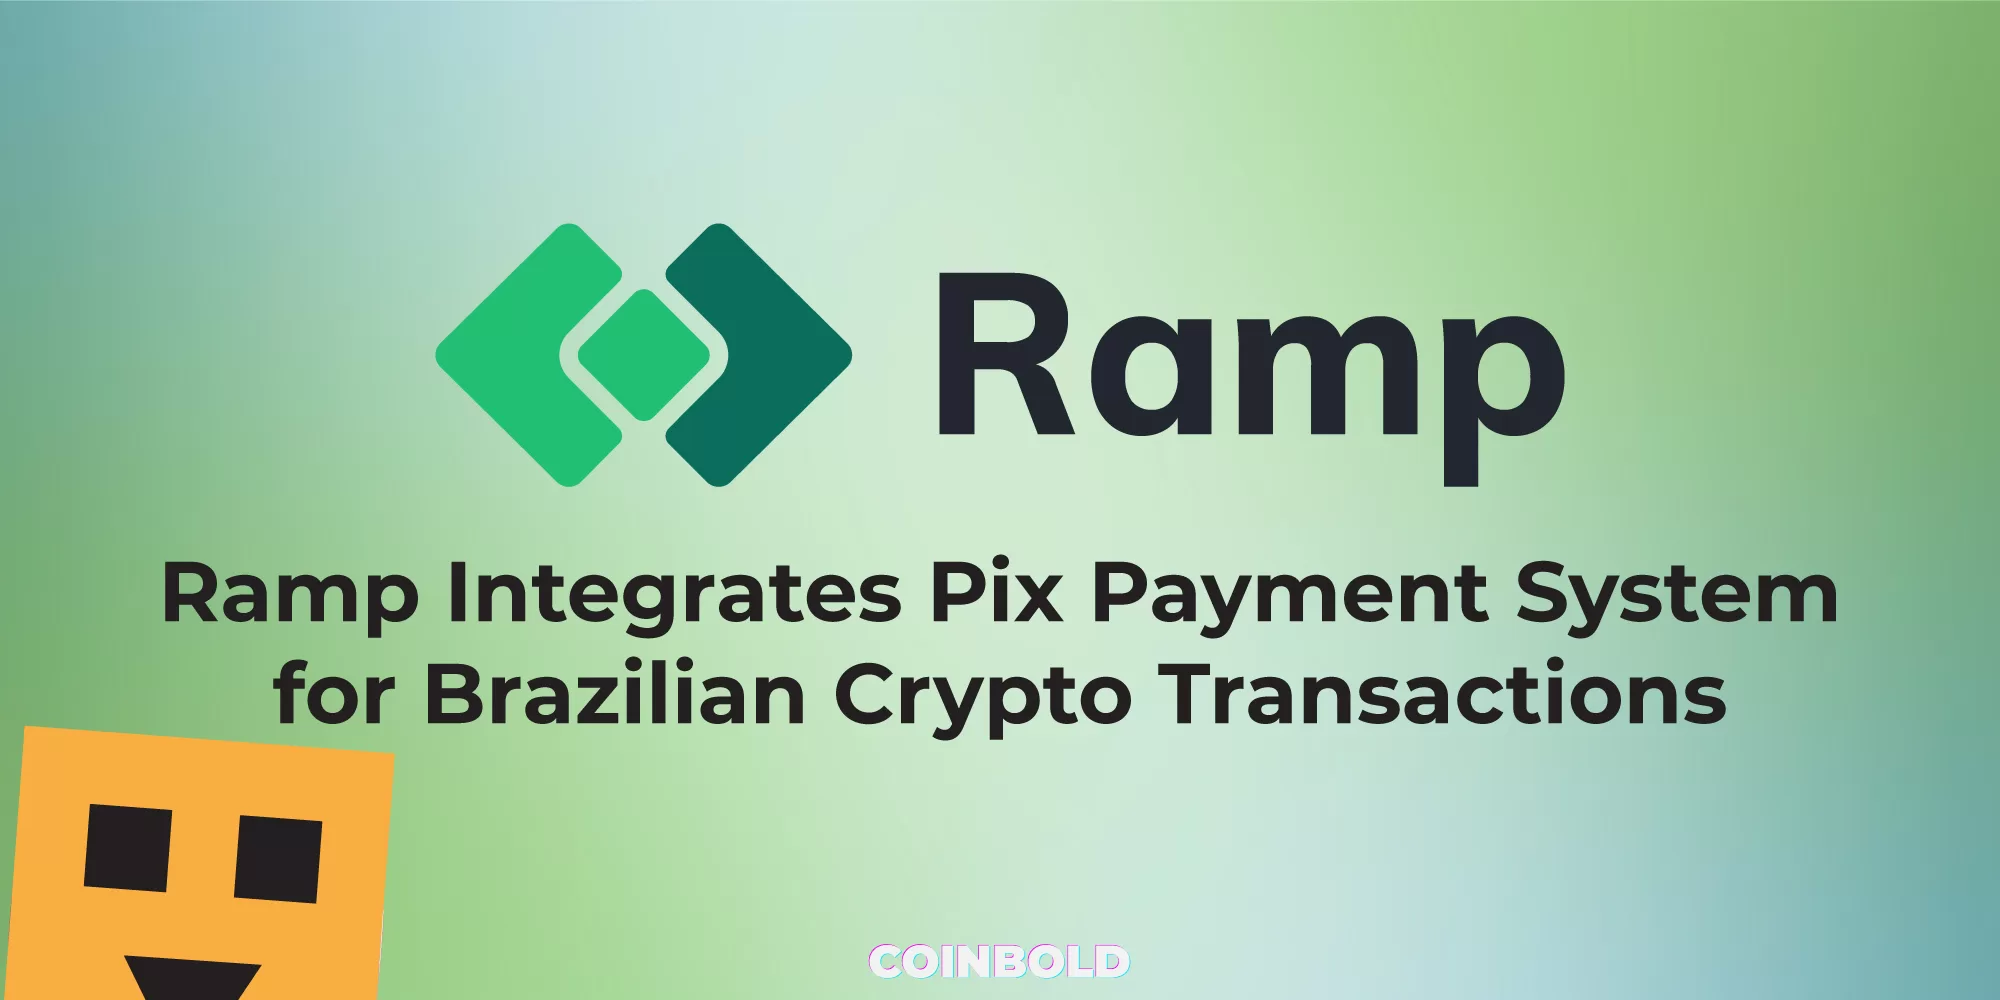 Ramp Integrates Pix Payment System for Brazilian Crypto Transactions